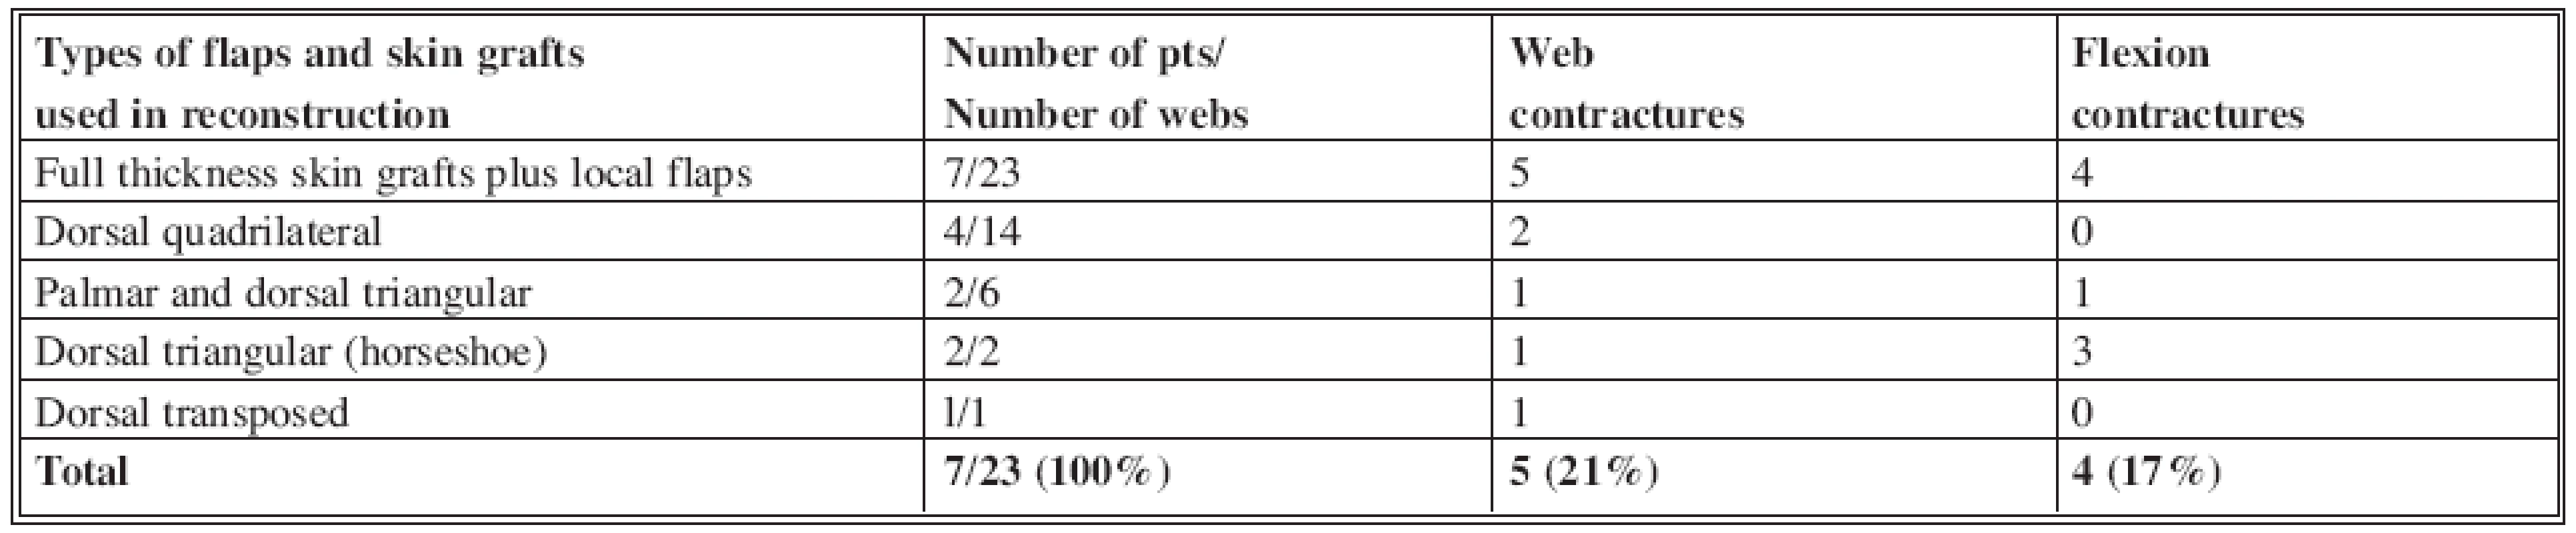 Comparison of web floor reconstruction methods and their influence on web and flexion contractures